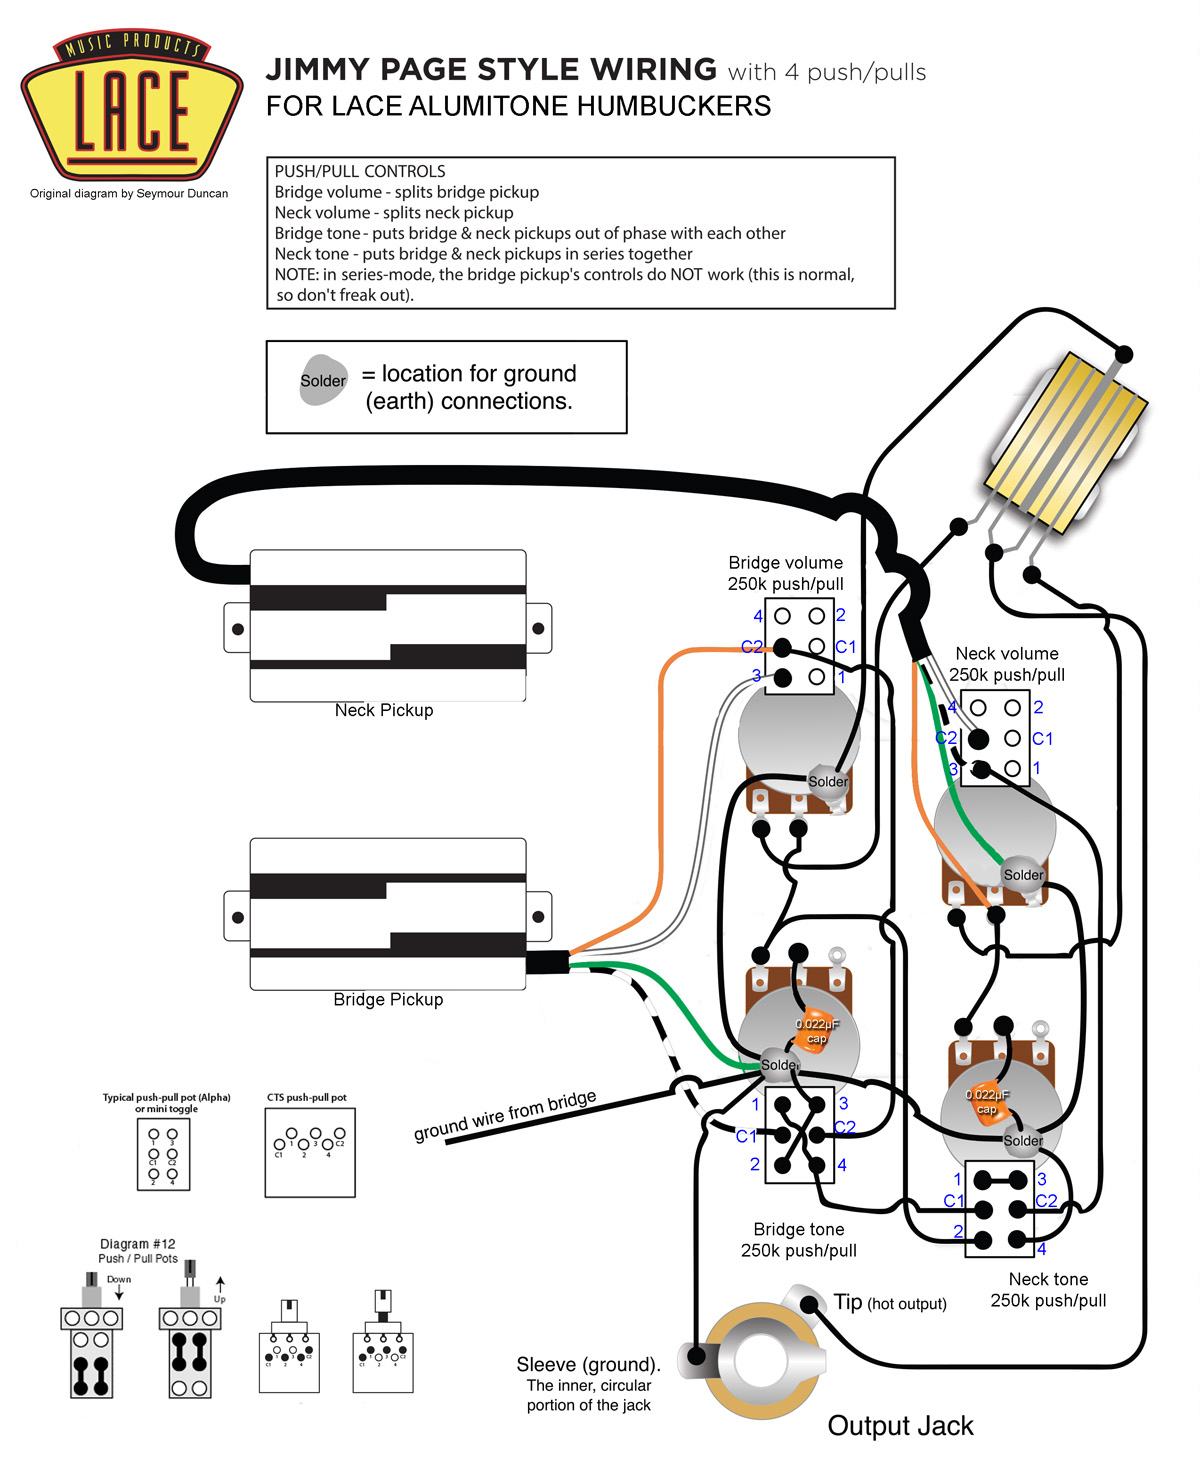 Jimmy Page Wiring Diagram | Wiring Diagram - Jimmy Page Wiring Diagram